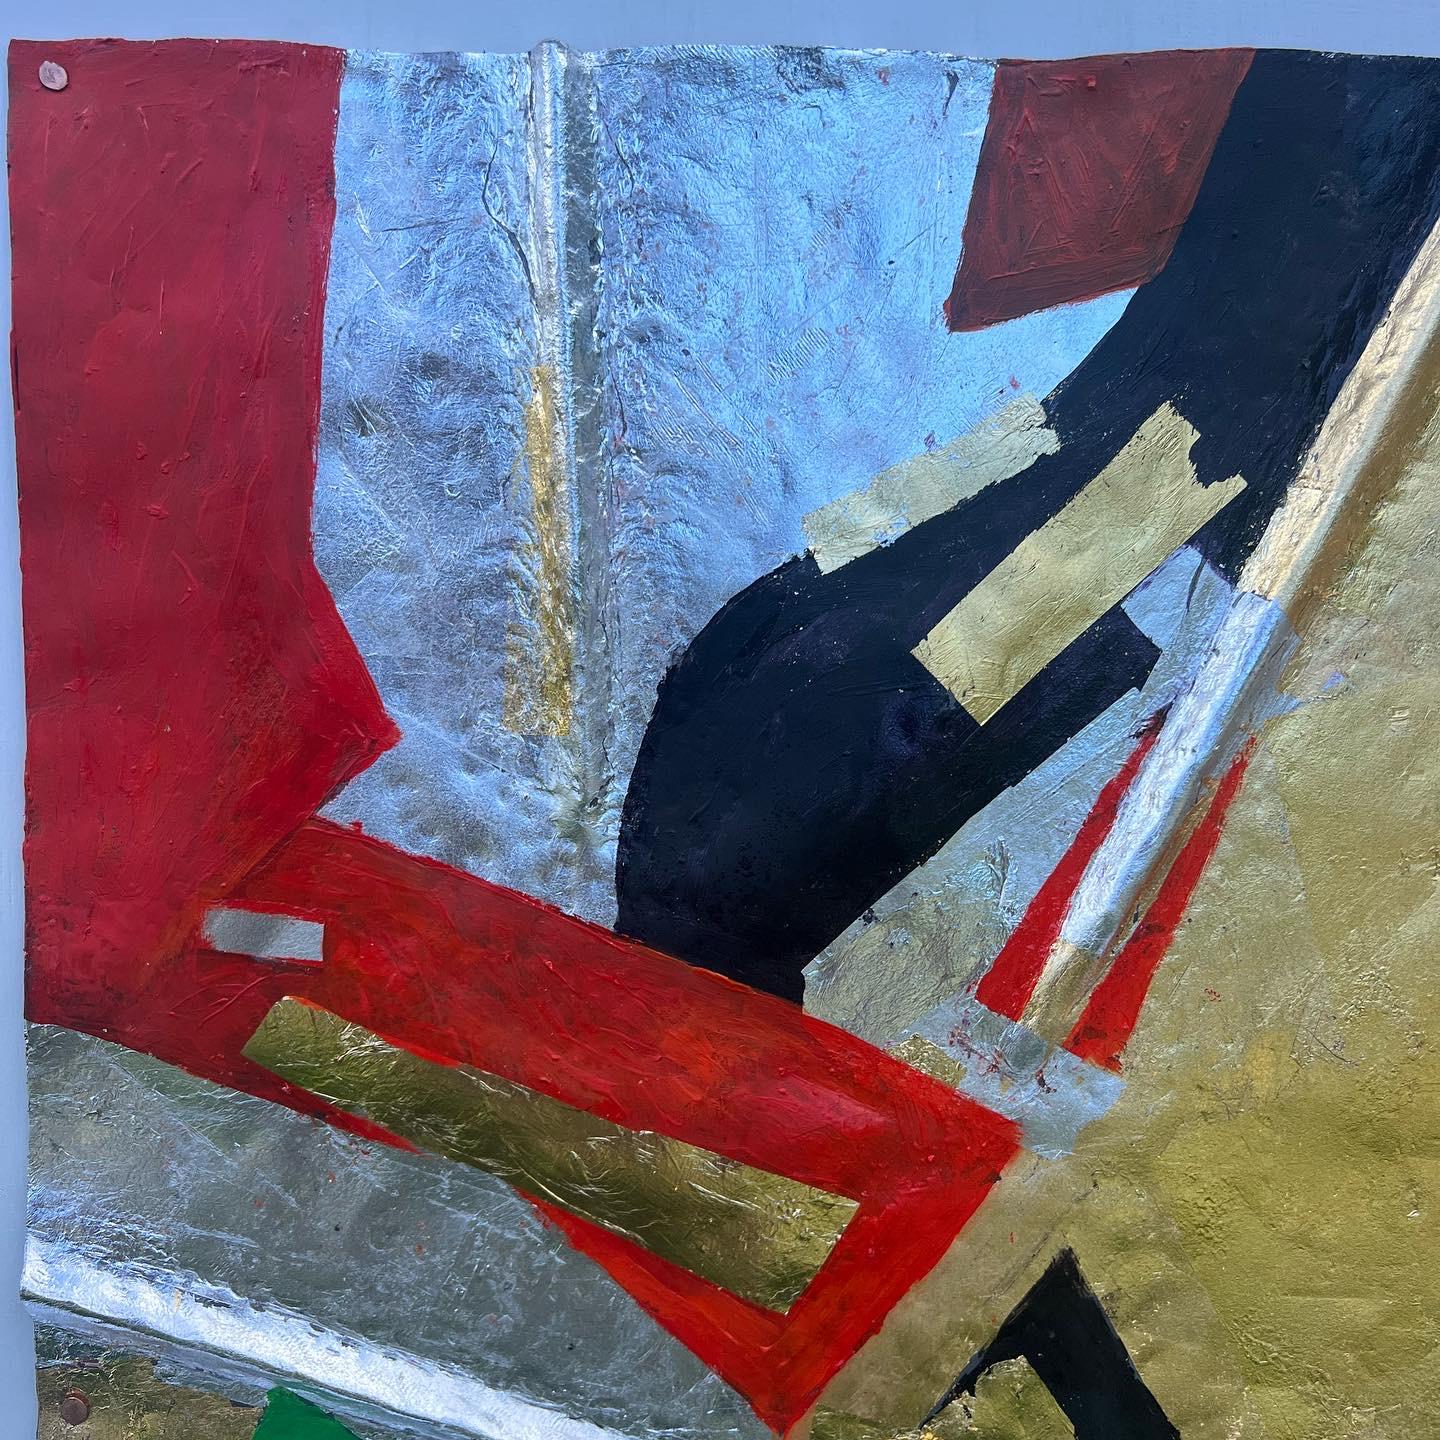 A rare abstract work by the indelible Giancarlo Impiglia. Oil, gold leaf, and silver leaf on lead, mounted on wood. 

Born in Rome, Impiglia moved to New York in the 70s, where he established a signature style on the shoulders of Futurism and